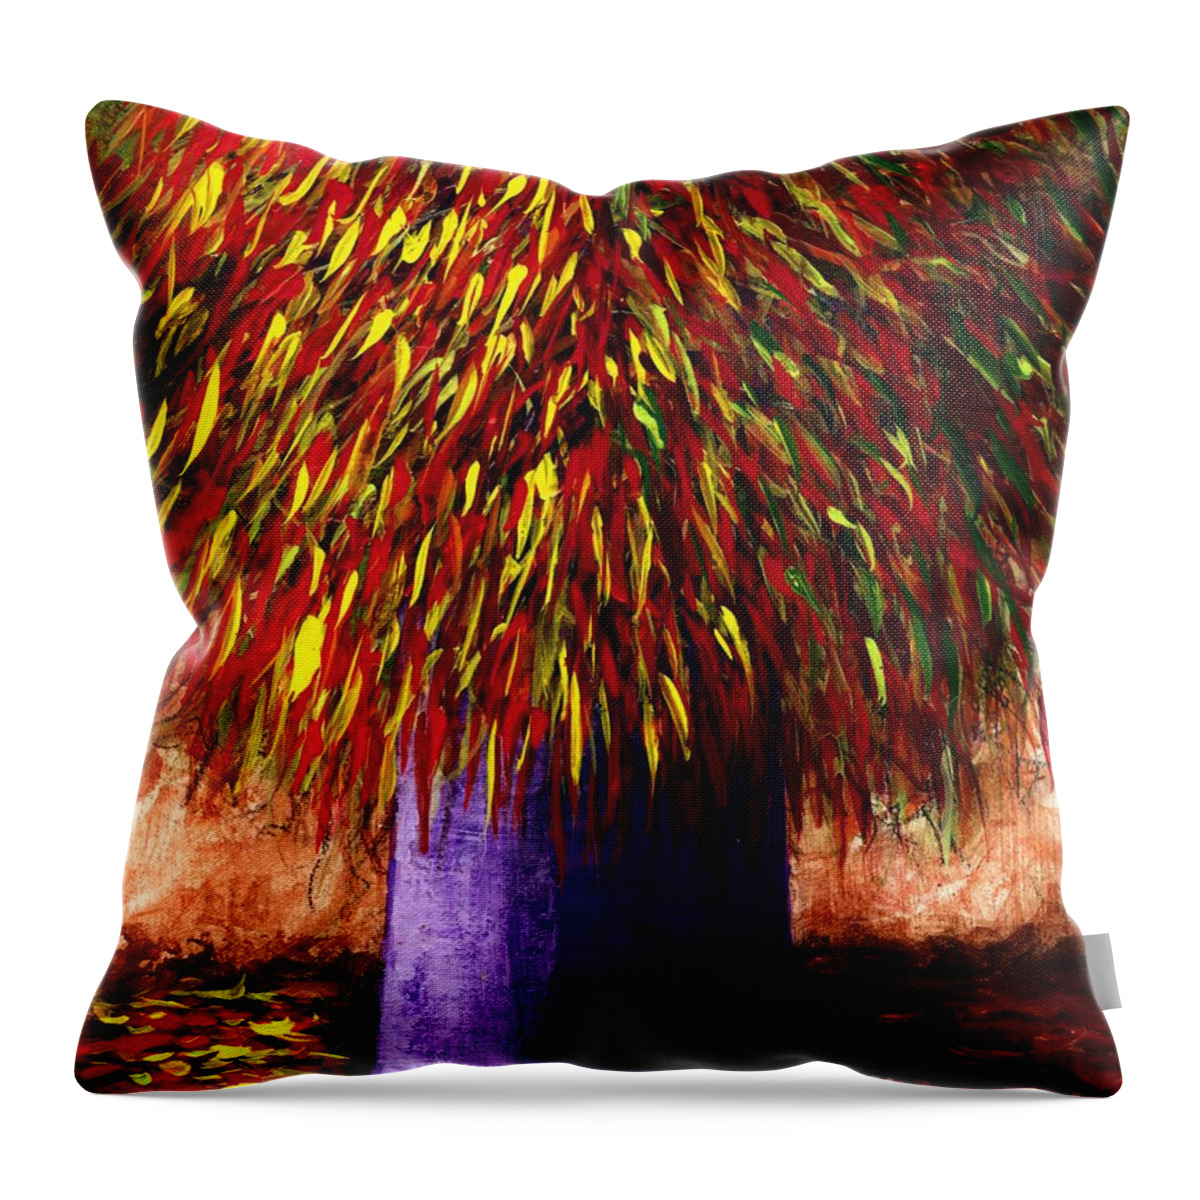 #peppers #plants #chiles #southwest #2d #artist #beautiful #colorful #fineart #followart #iloveart #interiordesign #luxuryart #mood #nature #newartwork #painting Throw Pillow featuring the painting Peppered by Allison Constantino